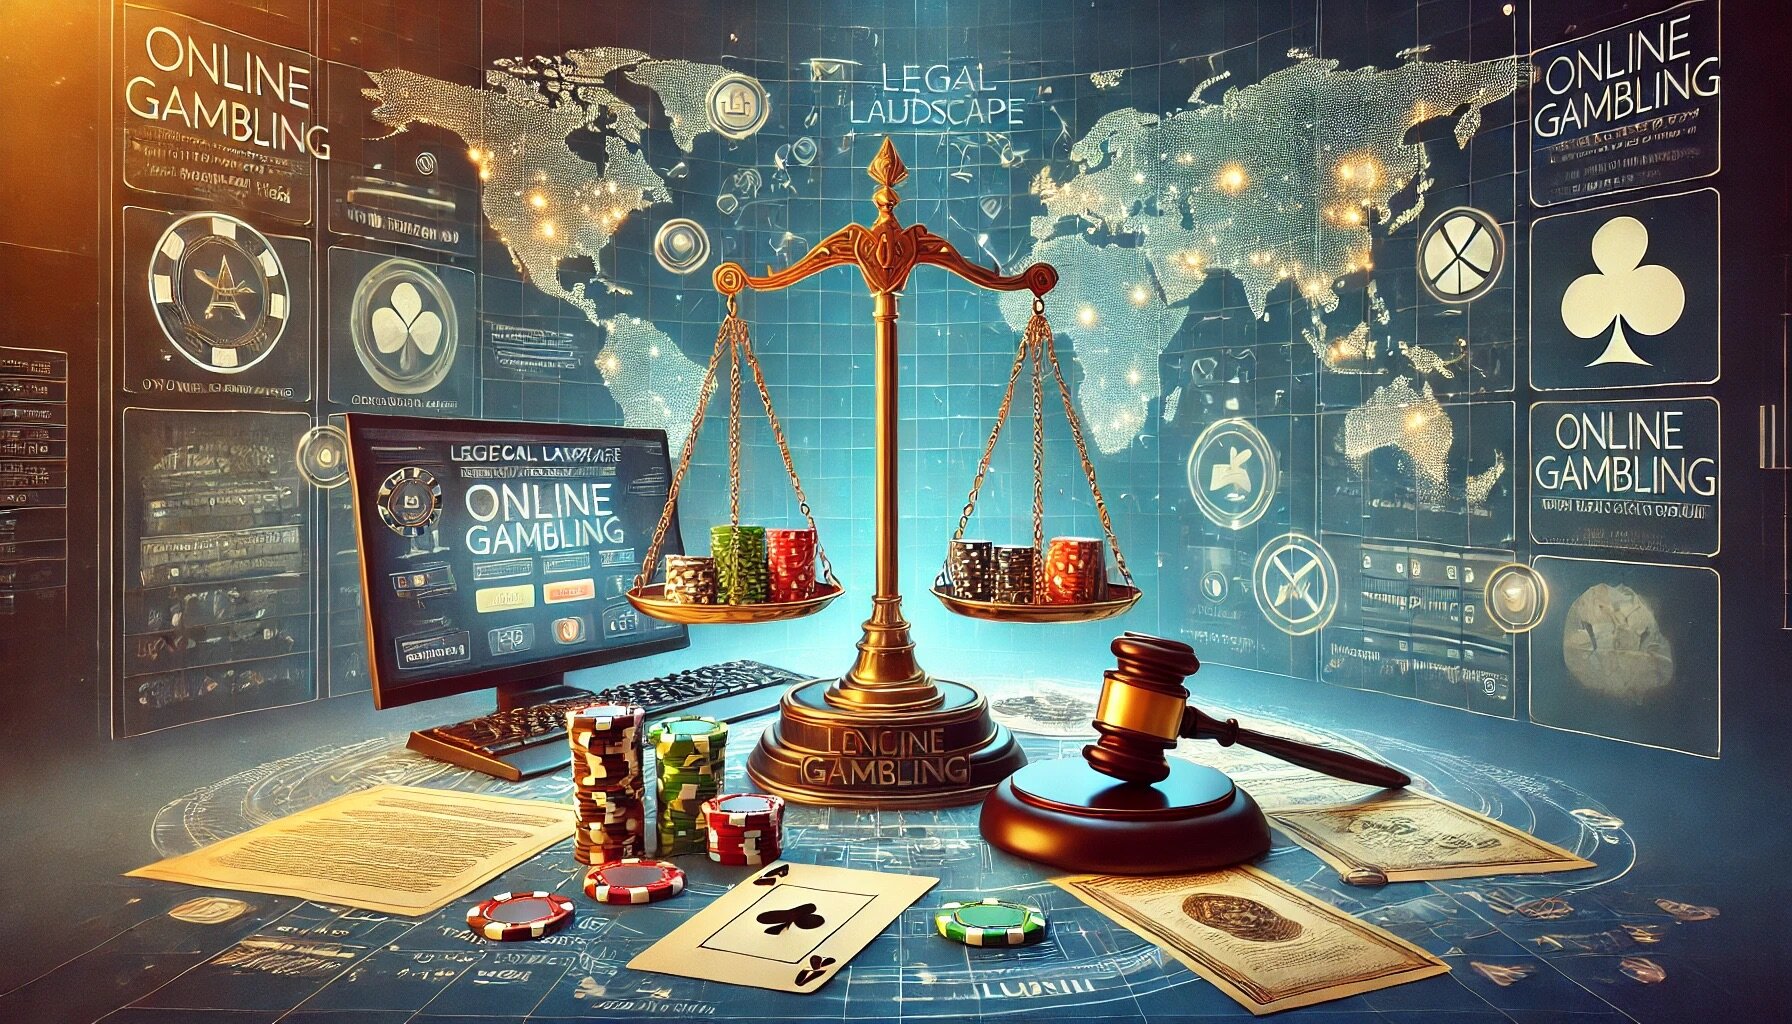 The legal landscape of online gambling: what players need to know